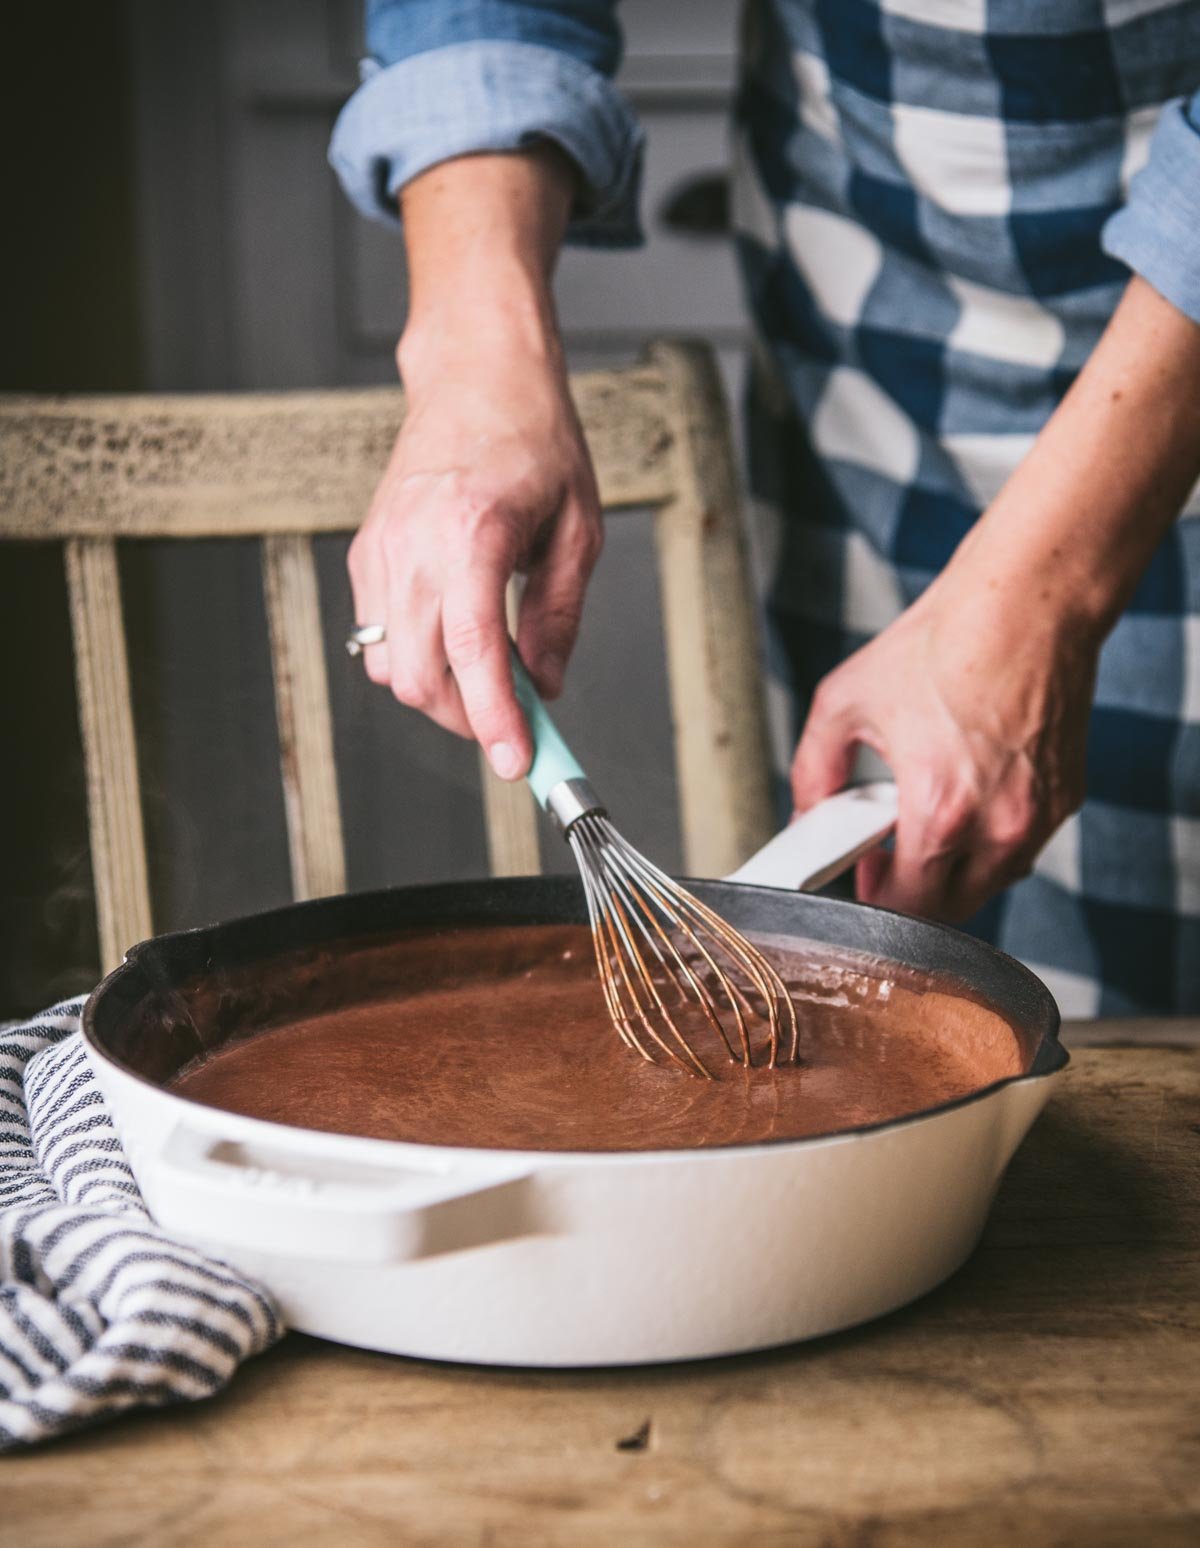 Whisking chocolate gravy in a cast iron skillet